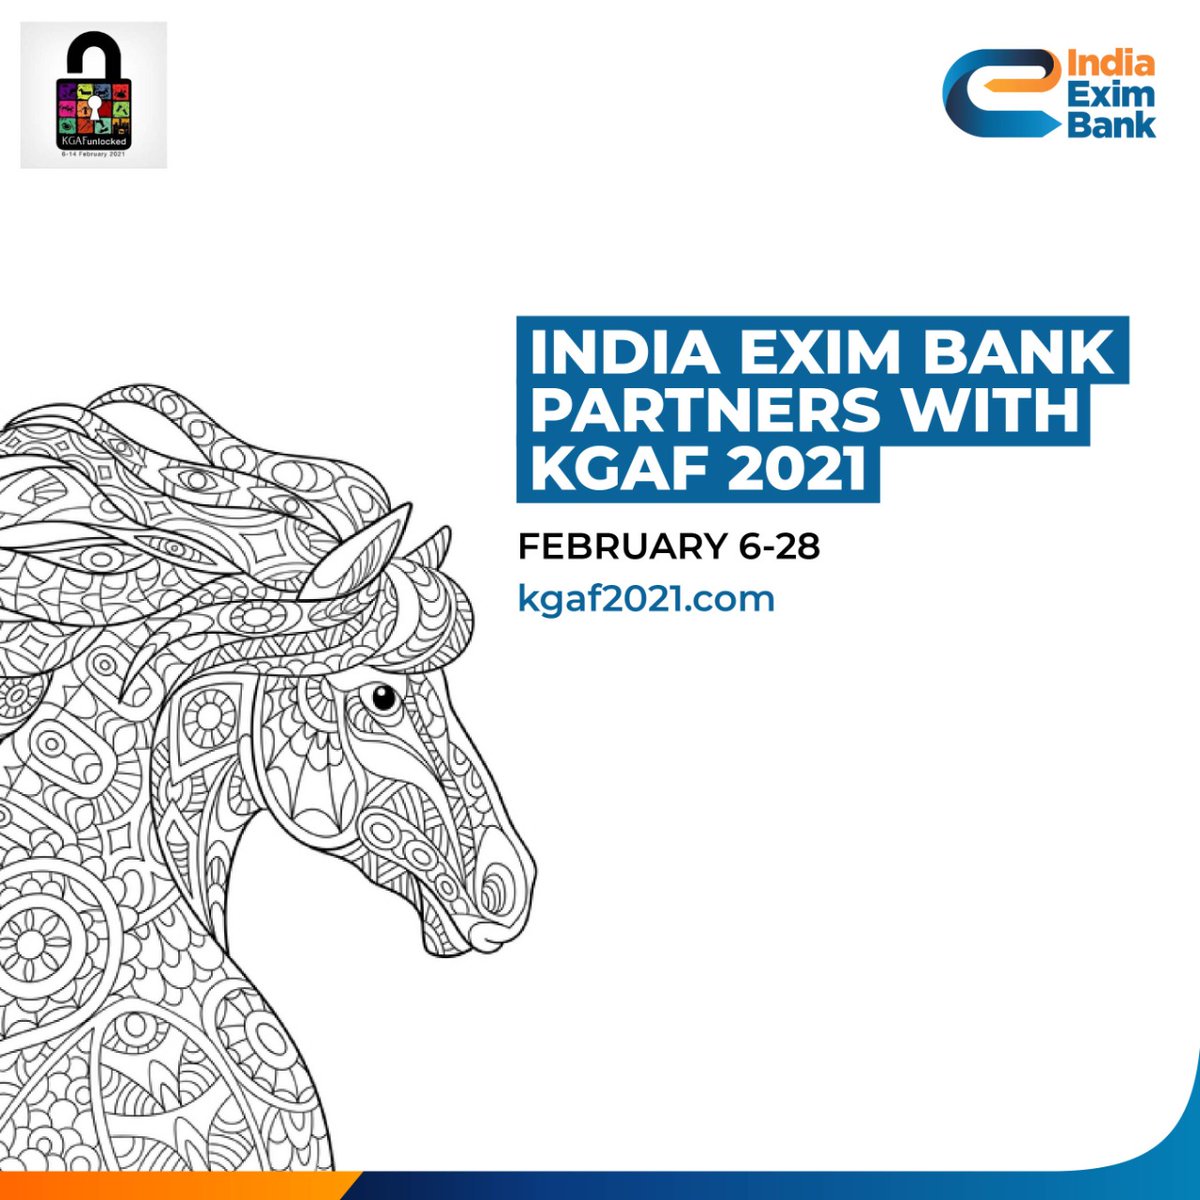 We, at Exim Bank, love to take the efforts of Indian artisans to the greatest of heights. In this direction, we are happy to announce our partnership with the 22nd virtual Kala Ghoda Arts Festival 2021. Enjoy the experience, online this year: kgaf2021.com

@kgafest